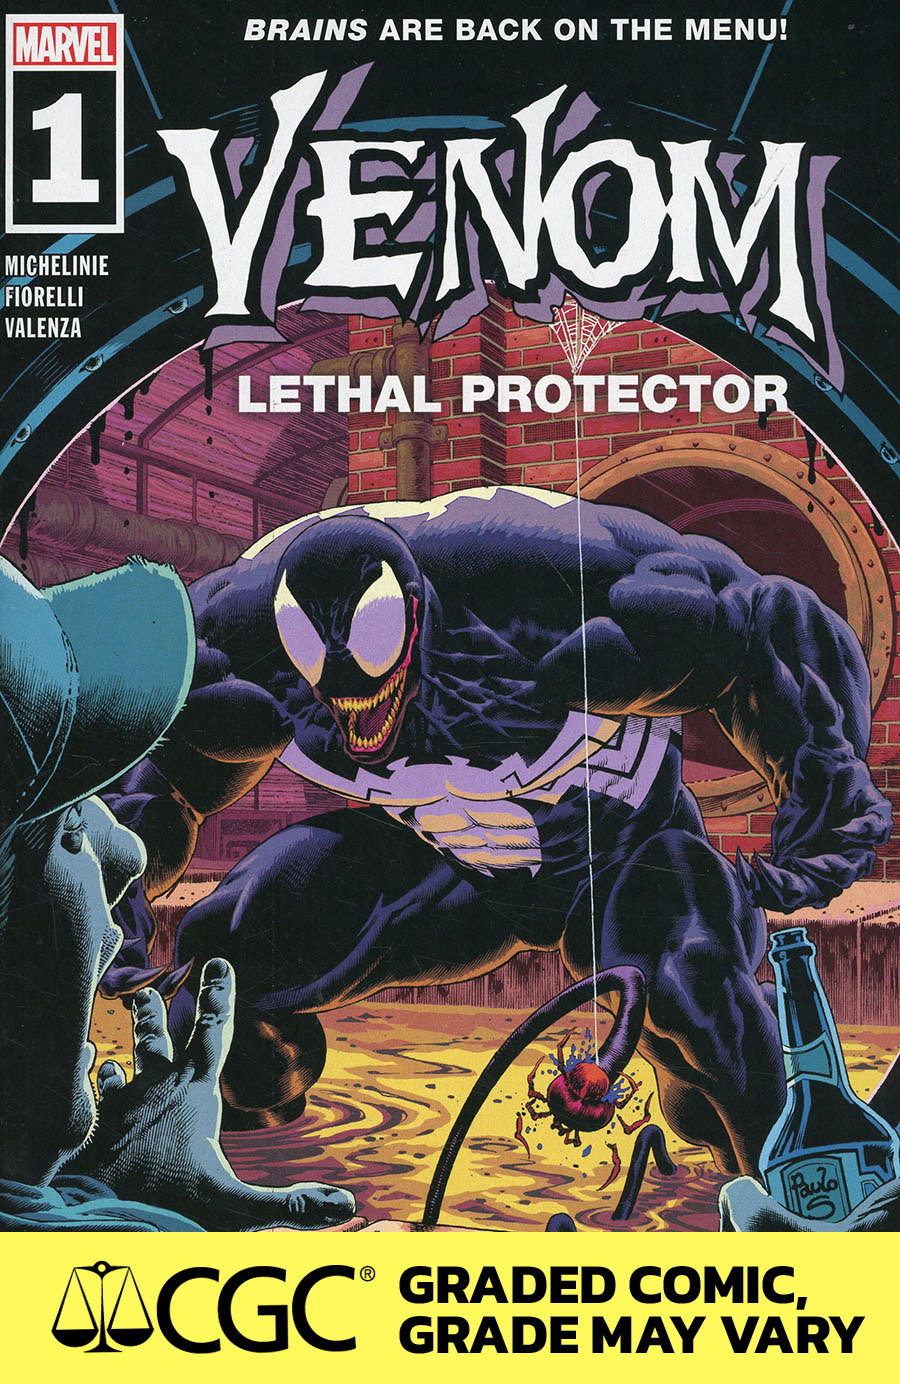 Venom Lethal Protector #1 Cover F DF CGC Graded 9.6 Or Higher